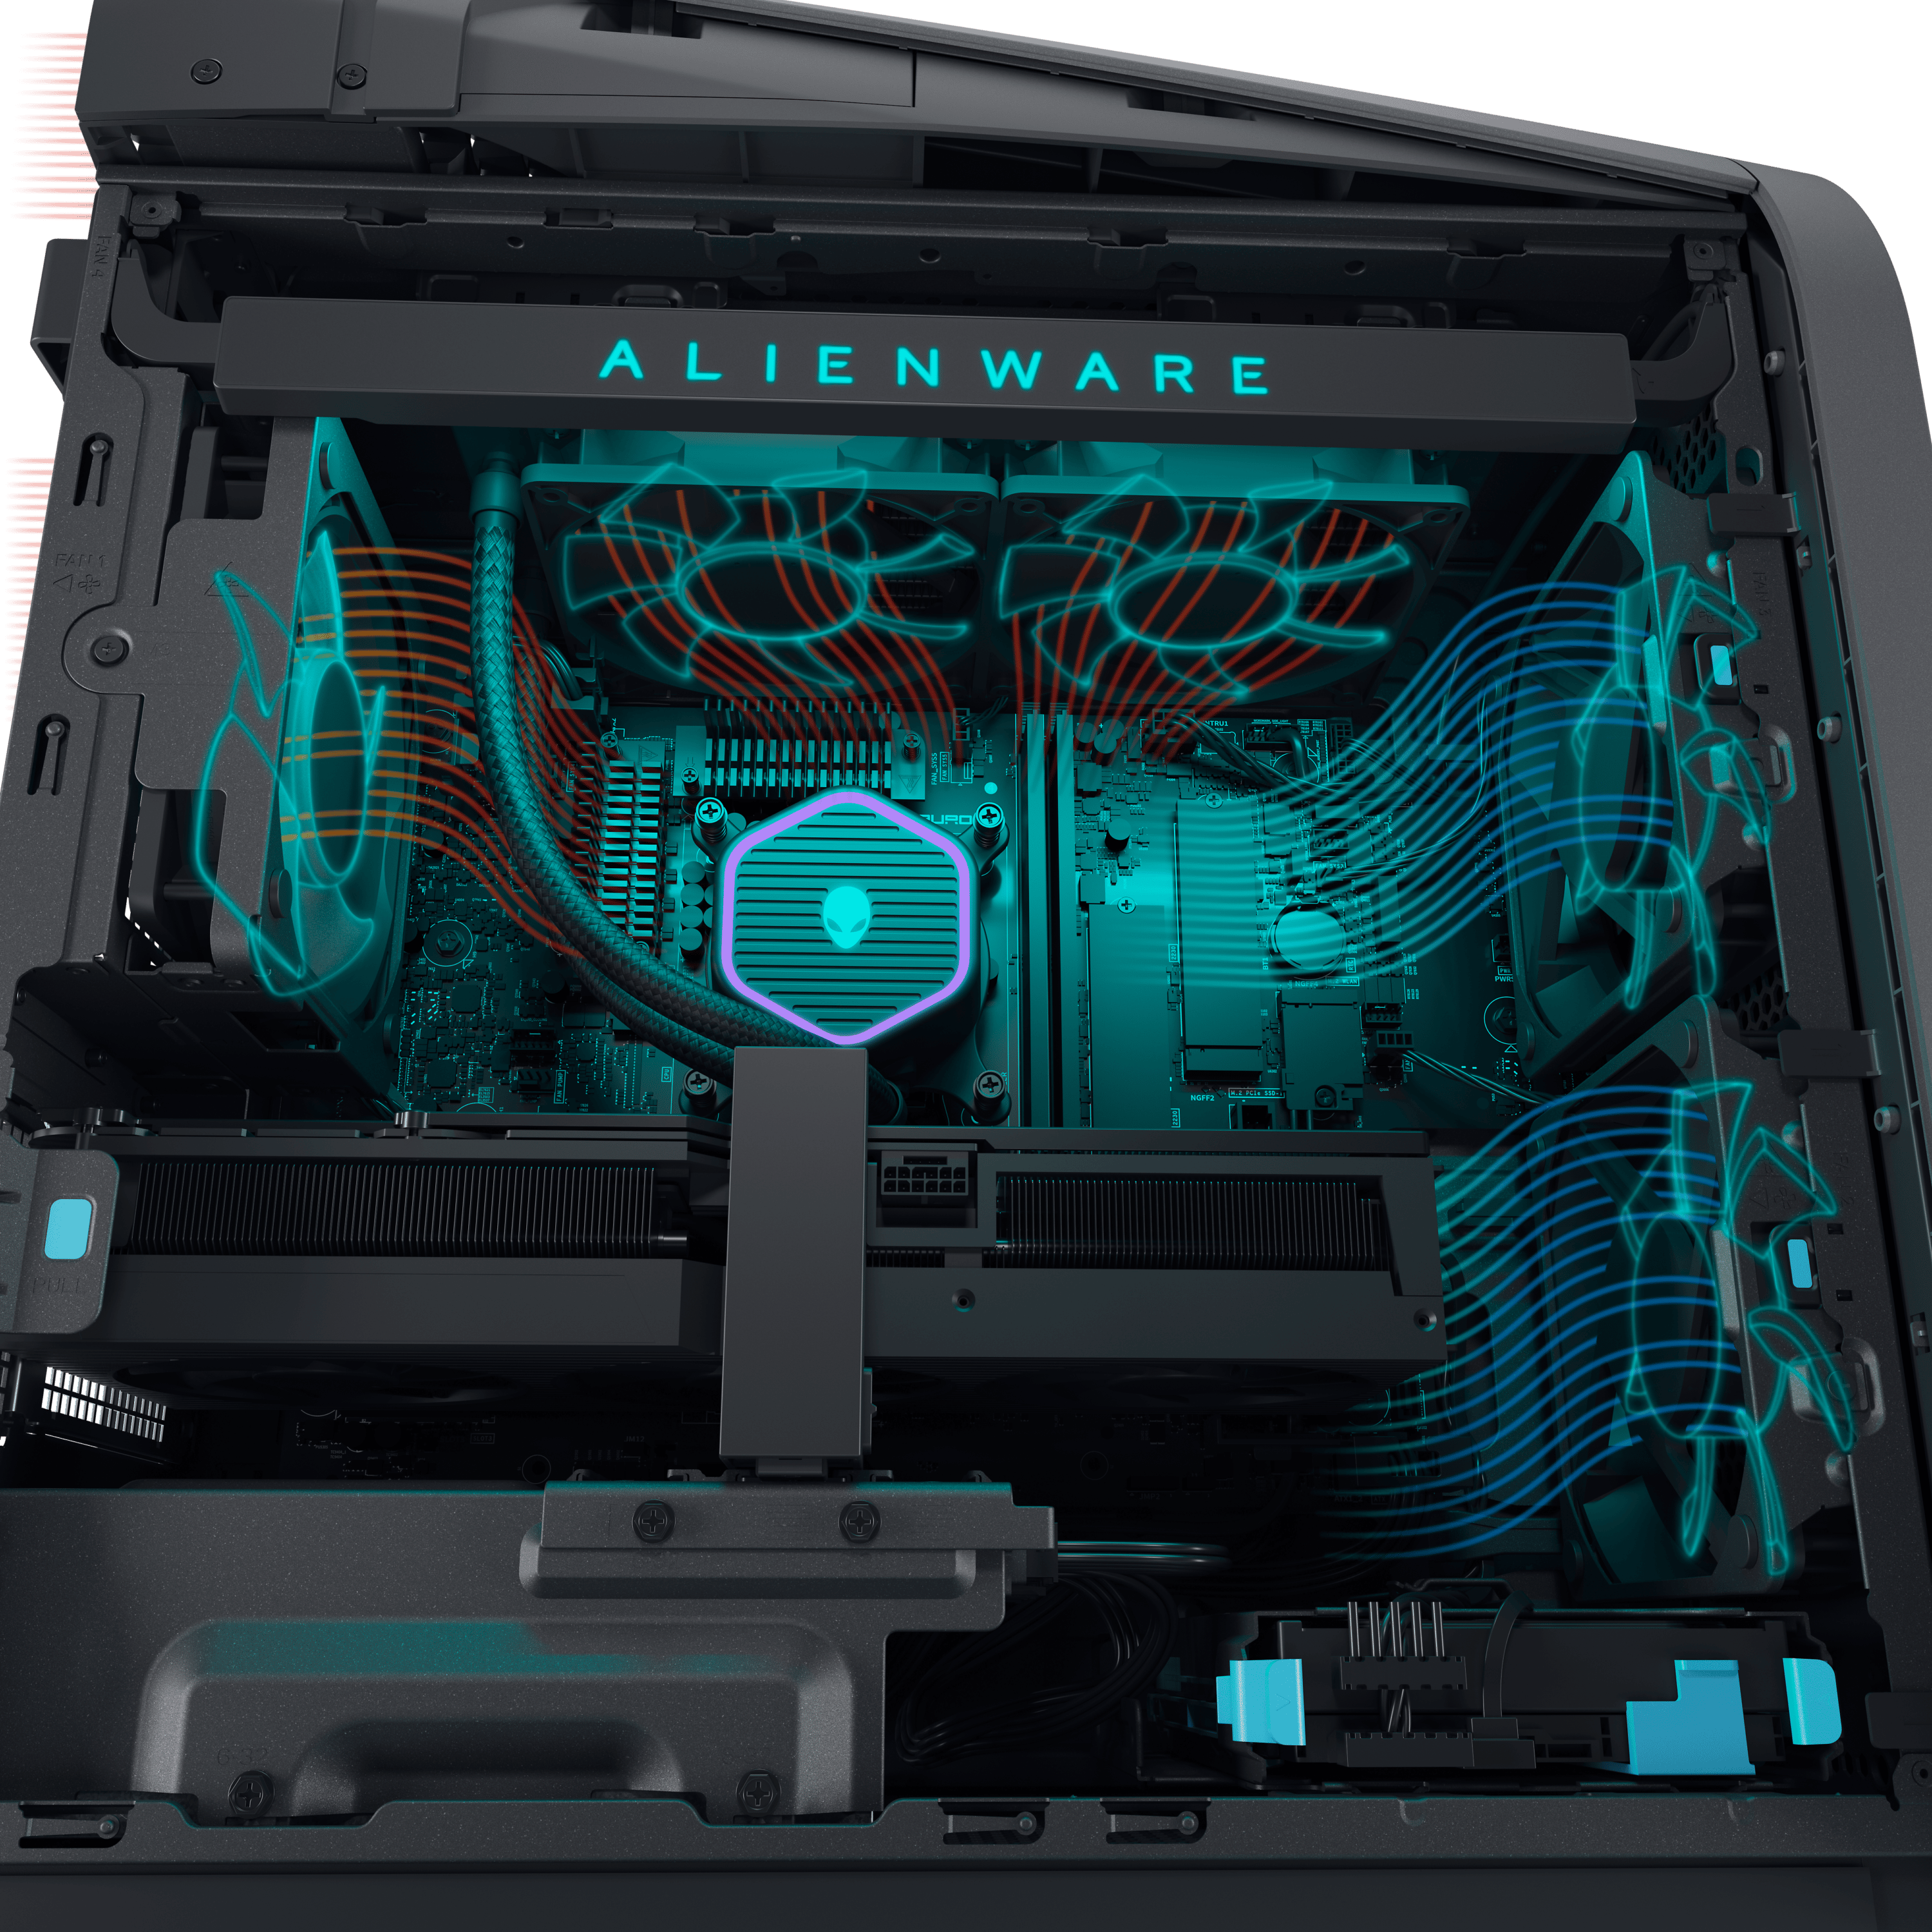 Alienware aurora r3 system fan only at 1k rpm